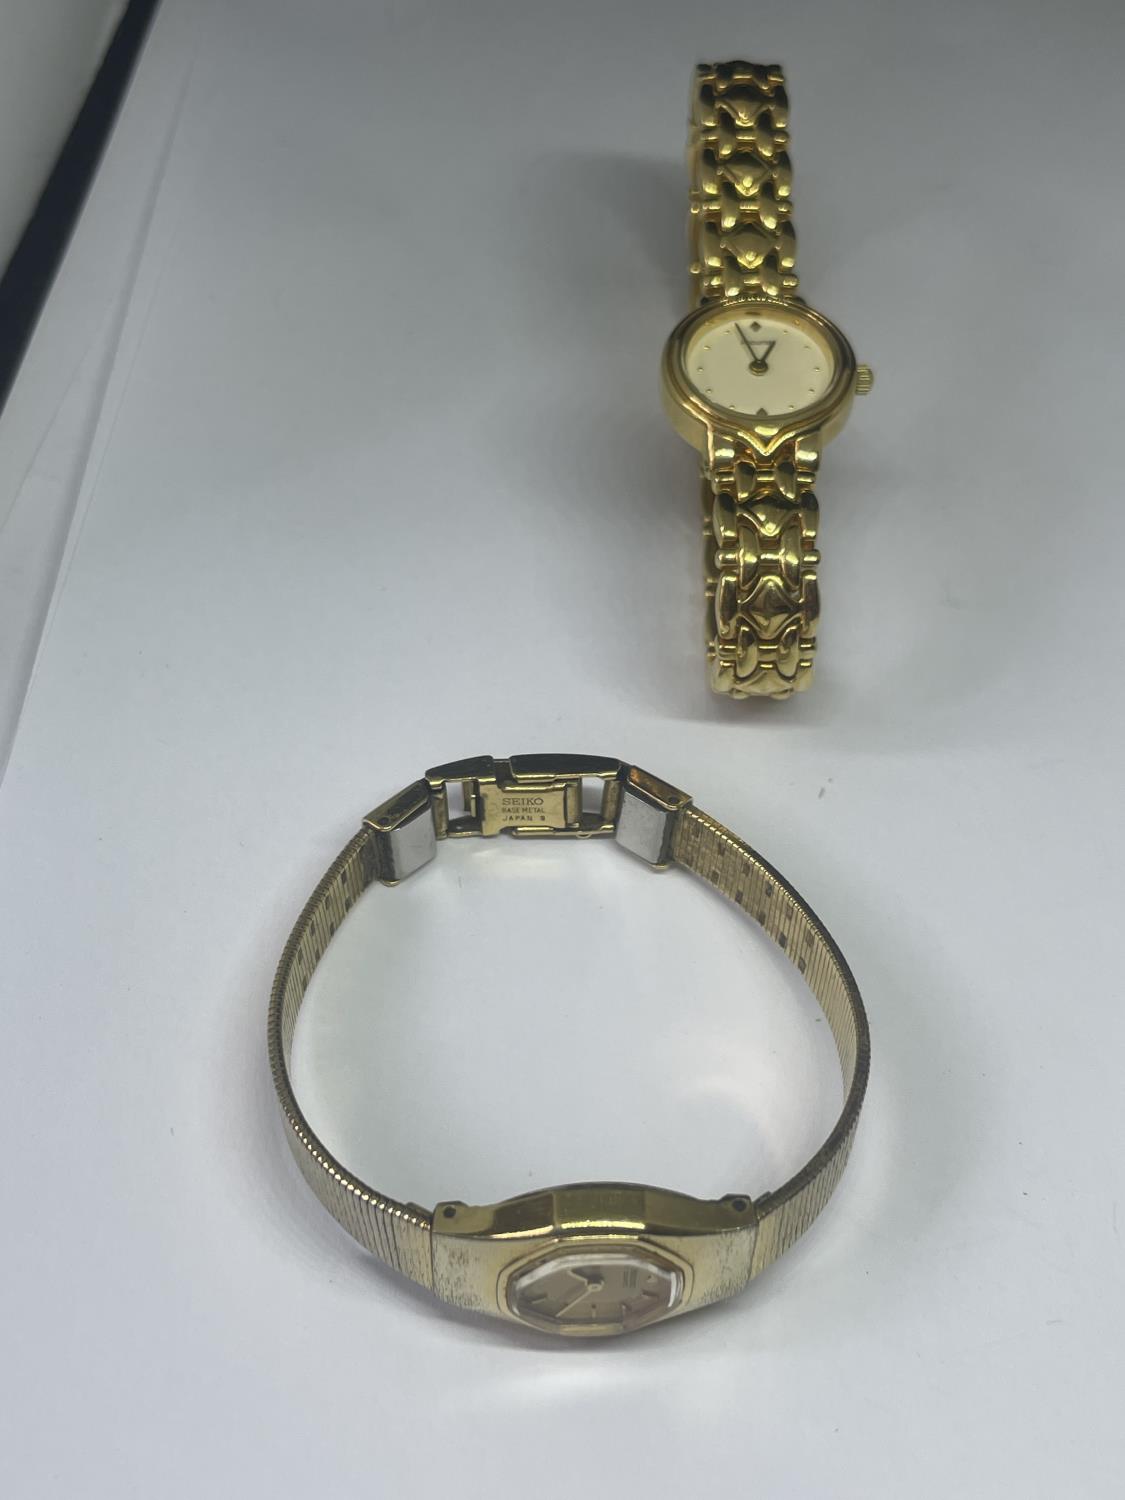 A QUANTITY OF WRIST WATCHES - Image 3 of 3